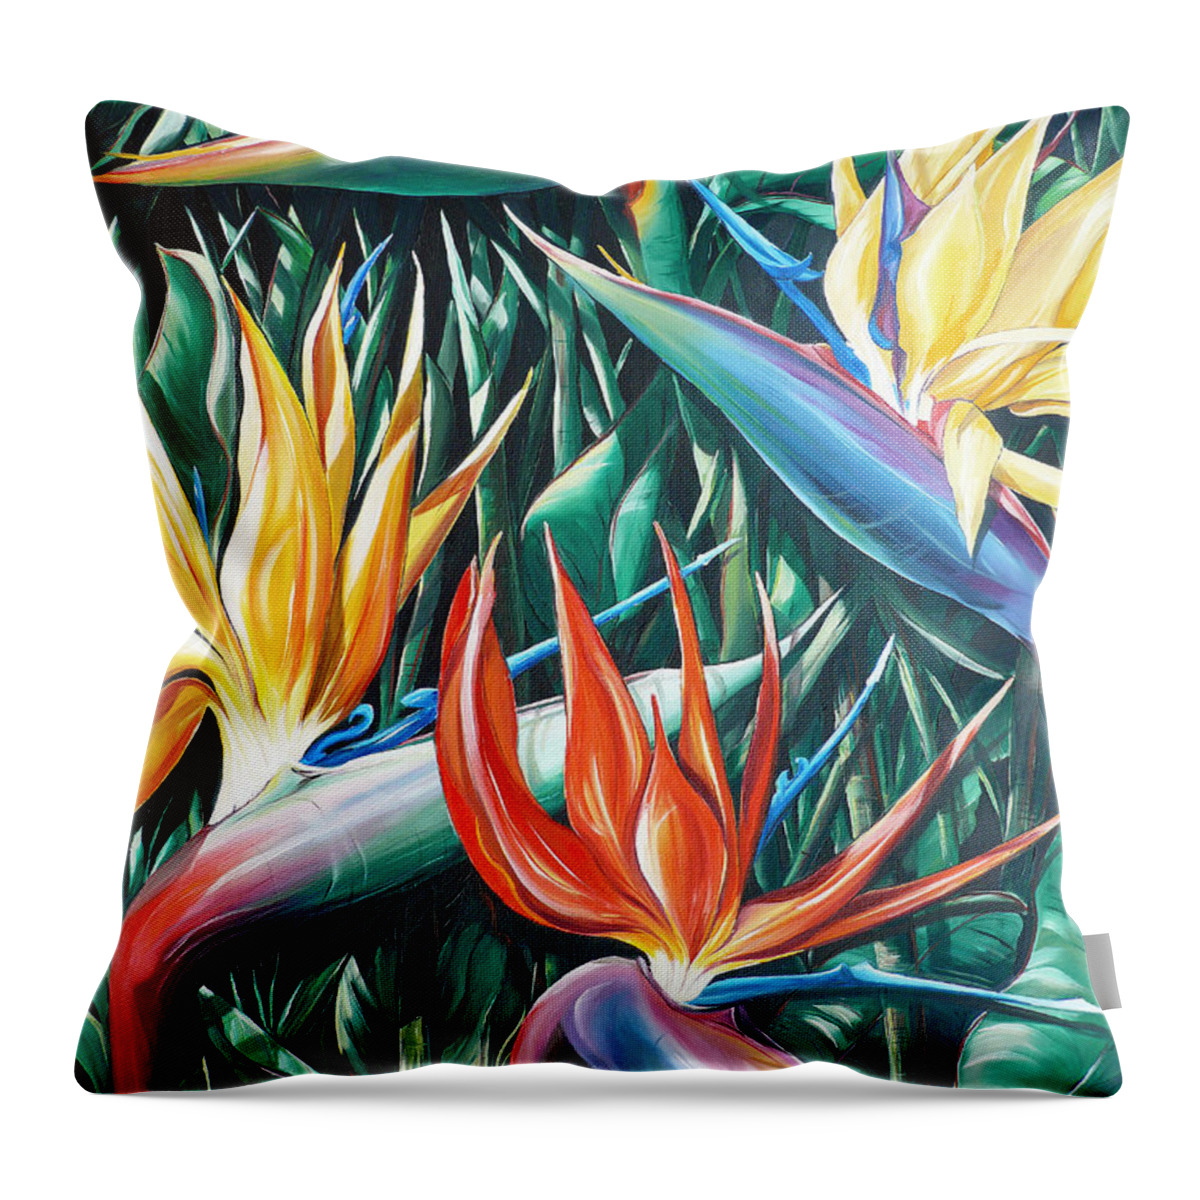  Caribbean Painting Bird Of Paradiseppainting Lily Painting Tropical Musa Painting  . Strelitzer Painting Caribbean Flora Paintingl Flower Red Yellow Painting Greeting Card Painting Throw Pillow featuring the painting Birds Of Paradise Sold  by Karin Dawn Kelshall- Best